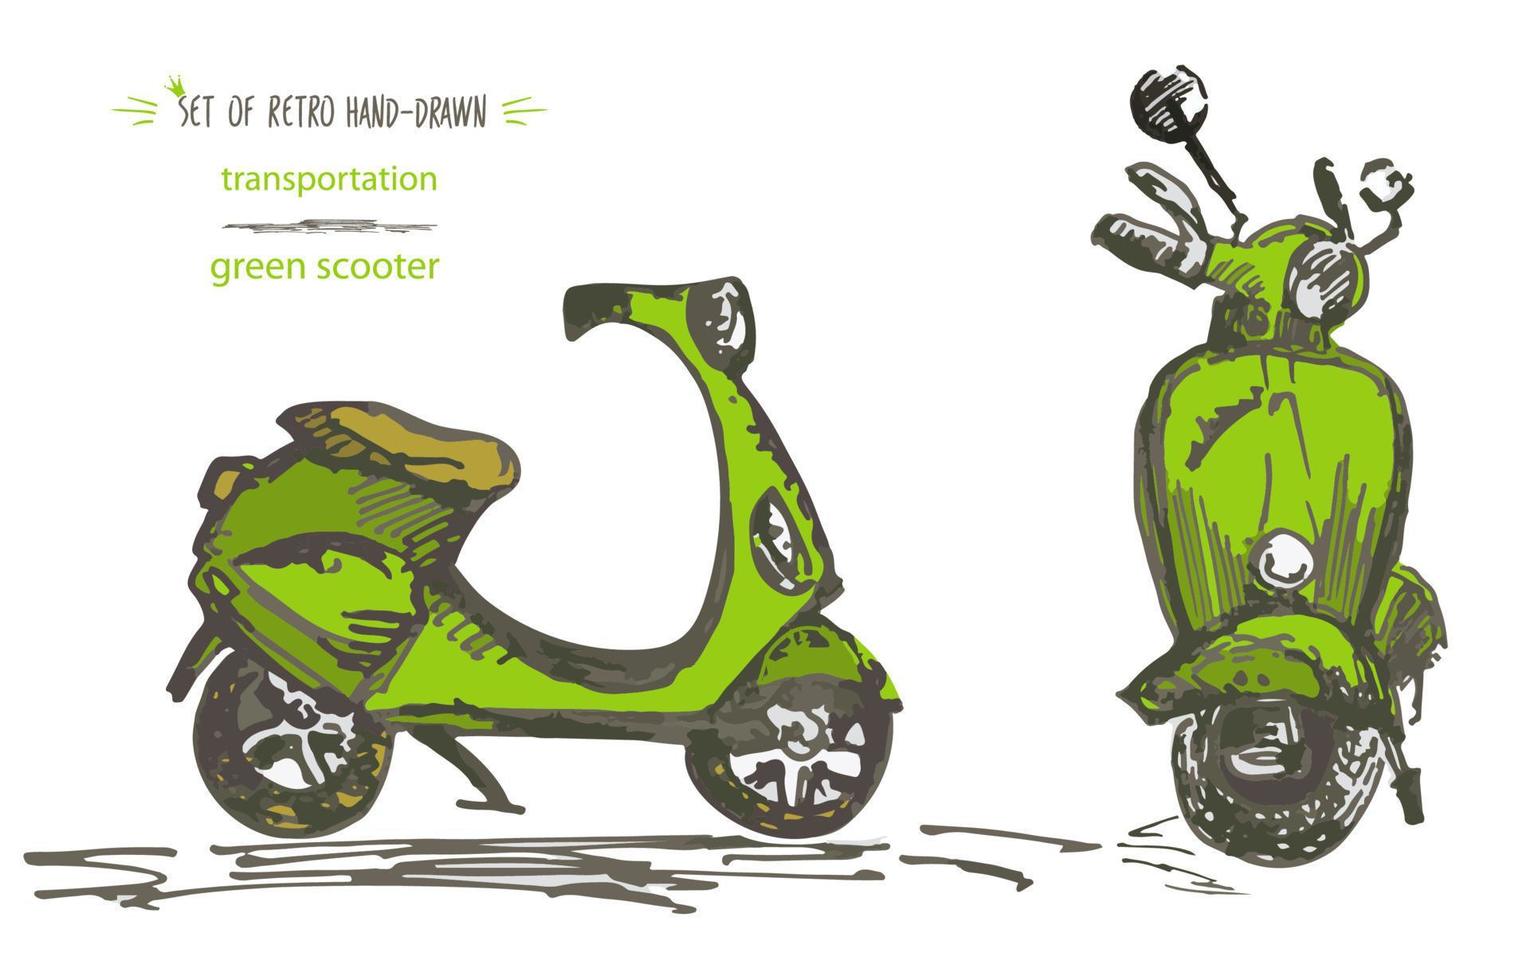 Set of hand-drawn green scooters. Ink brush sketch vector